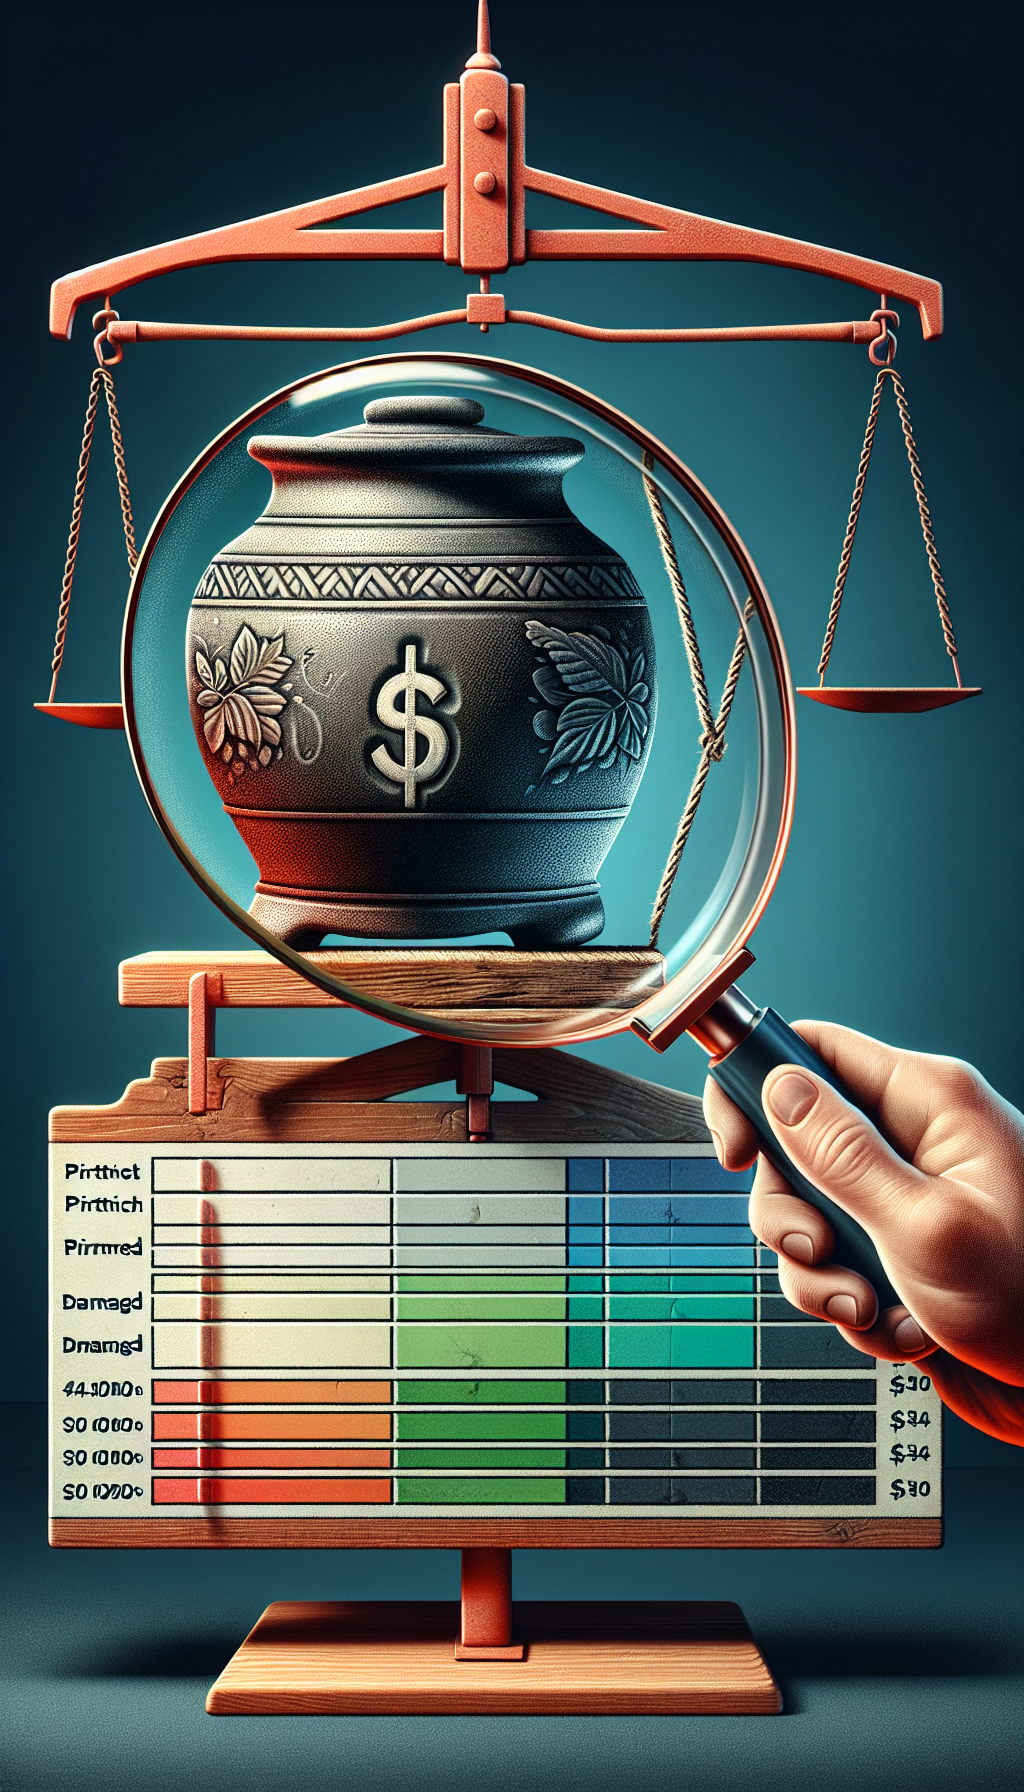 An illustration of a magnifying glass held over a vintage 10-gallon crock, which stands atop a grading scale ranging from "Pristine" to "Damaged". Lighting focuses on the crock, revealing its intricate patterns and potential flaws, while the scale below subtly incorporates dollar symbols to signify its fluctuating value based on condition. The styles shift from hyper-realistic on the crock and glass to a more abstract, color-blocked scale.